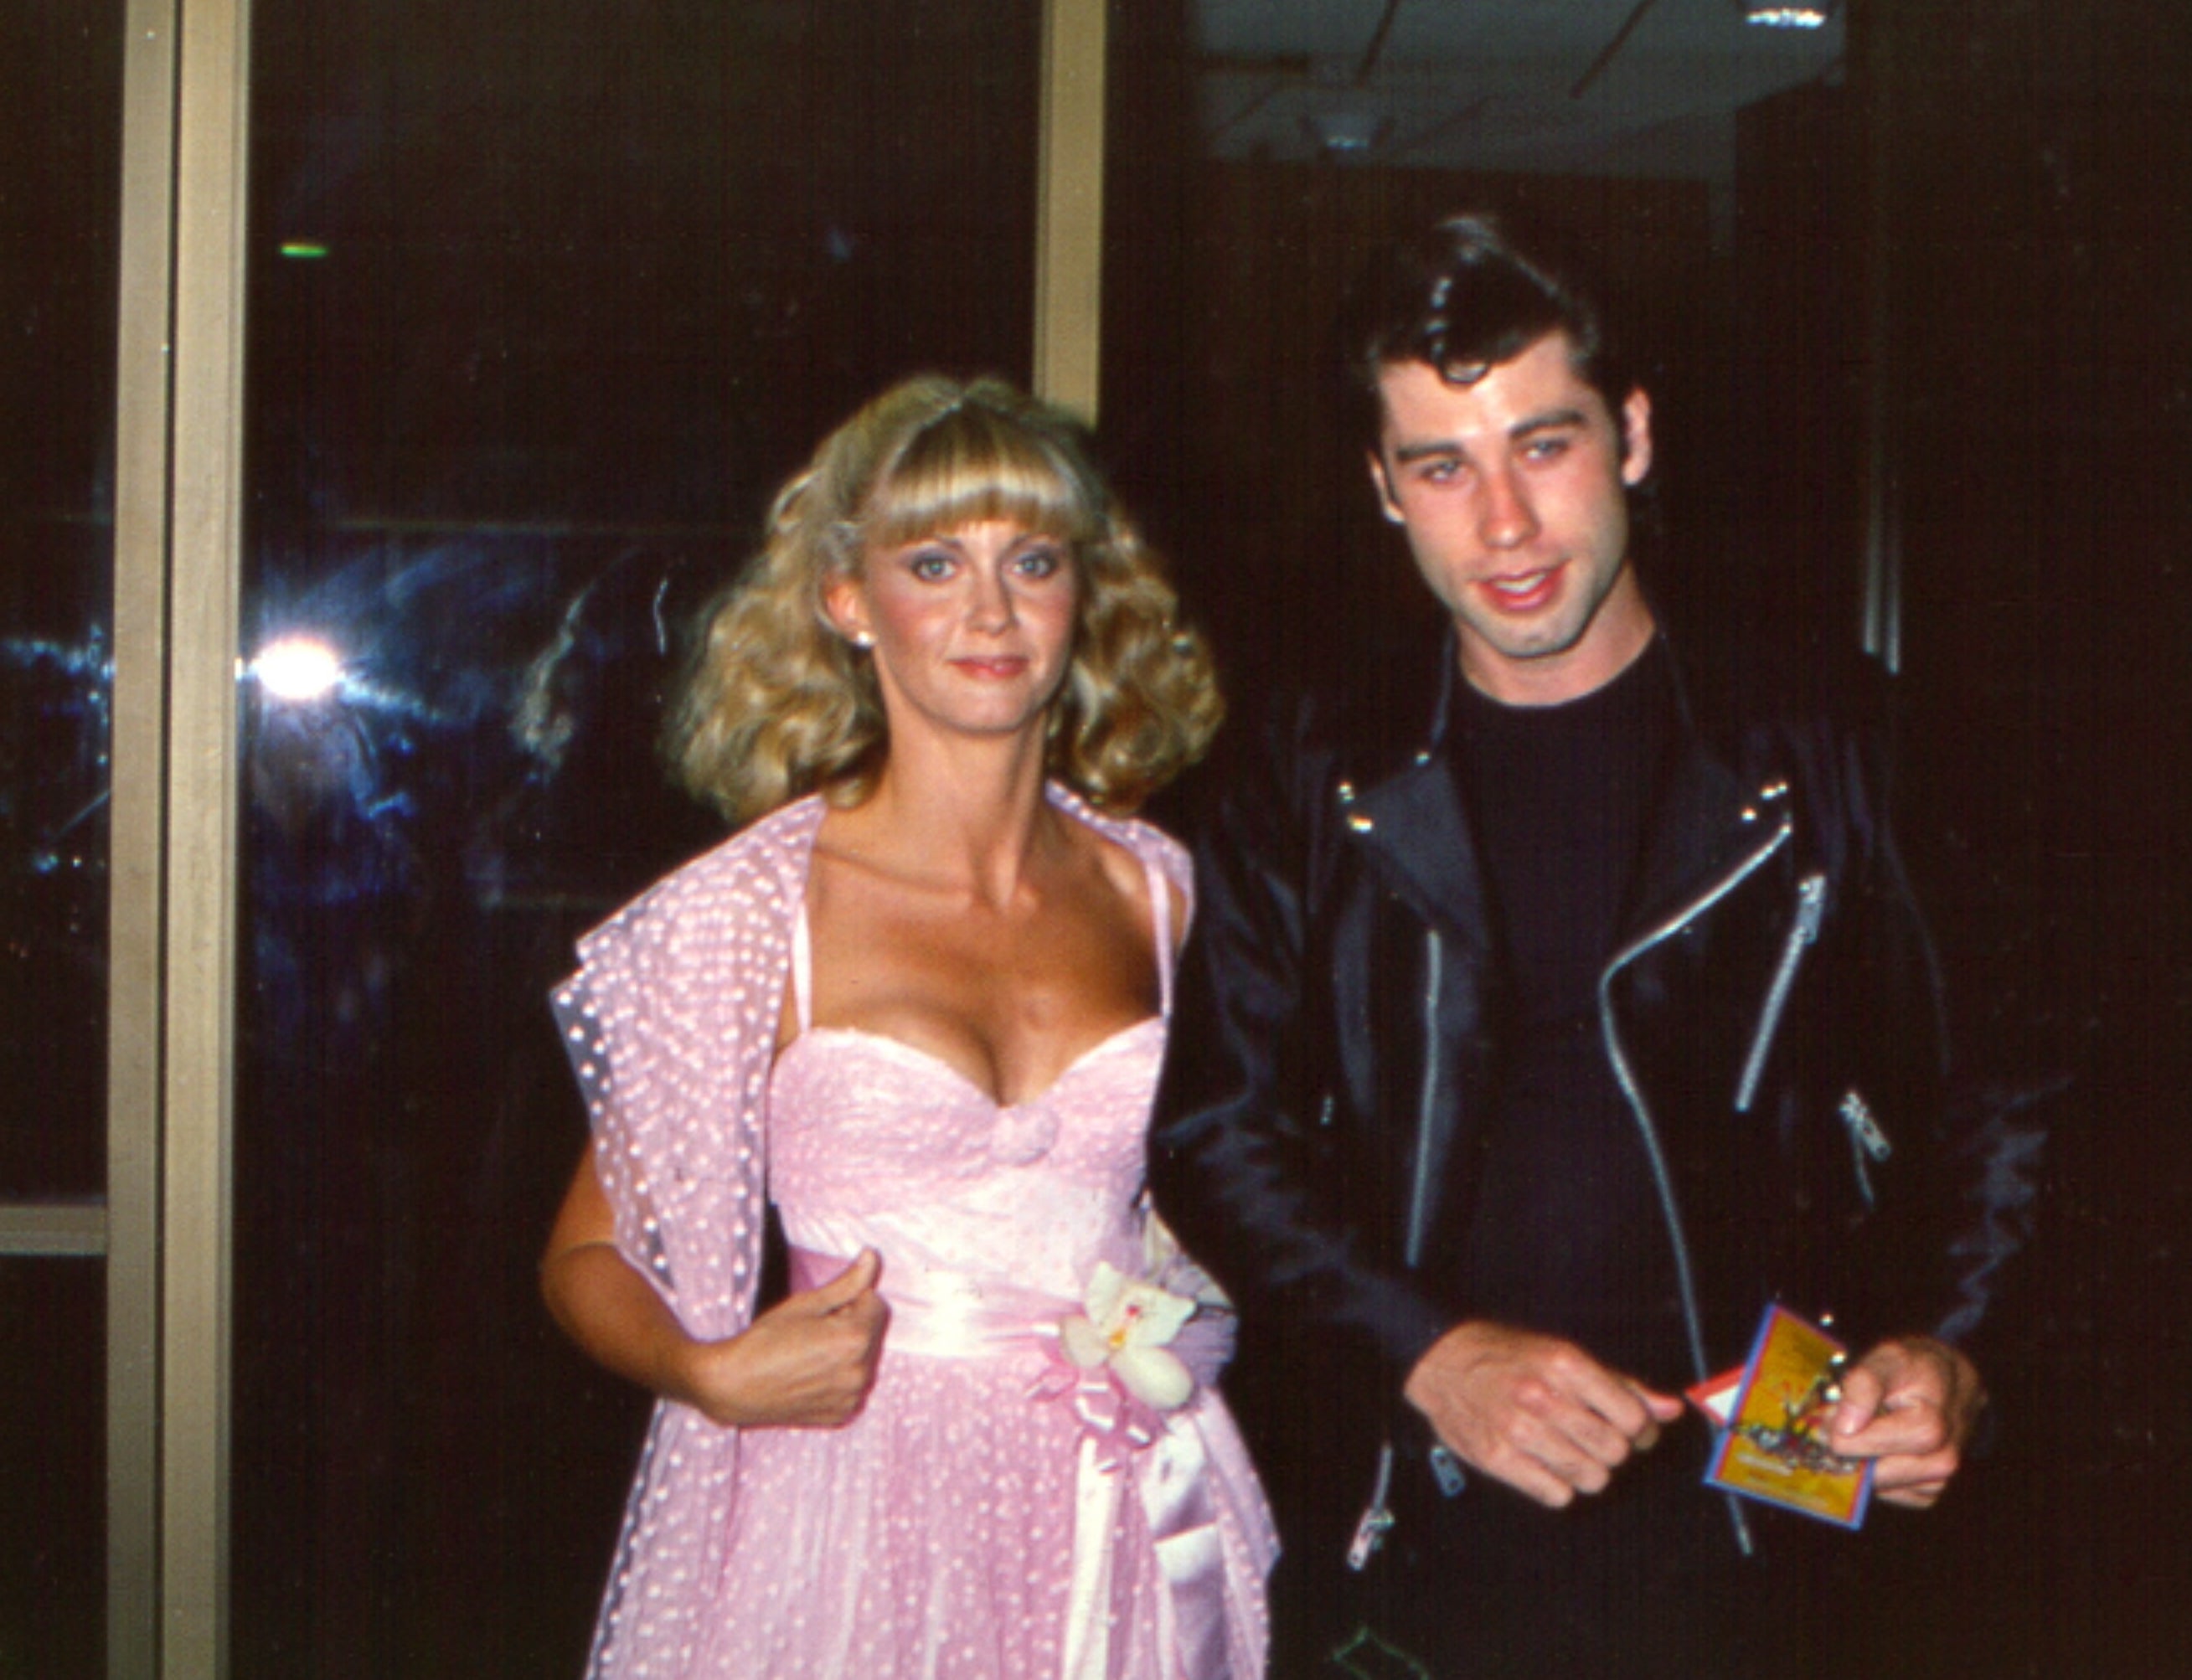 Singer and actor Olivia Newton-John and co-star John Travolta attend the premiere of the film &#x27;Grease&#x27;